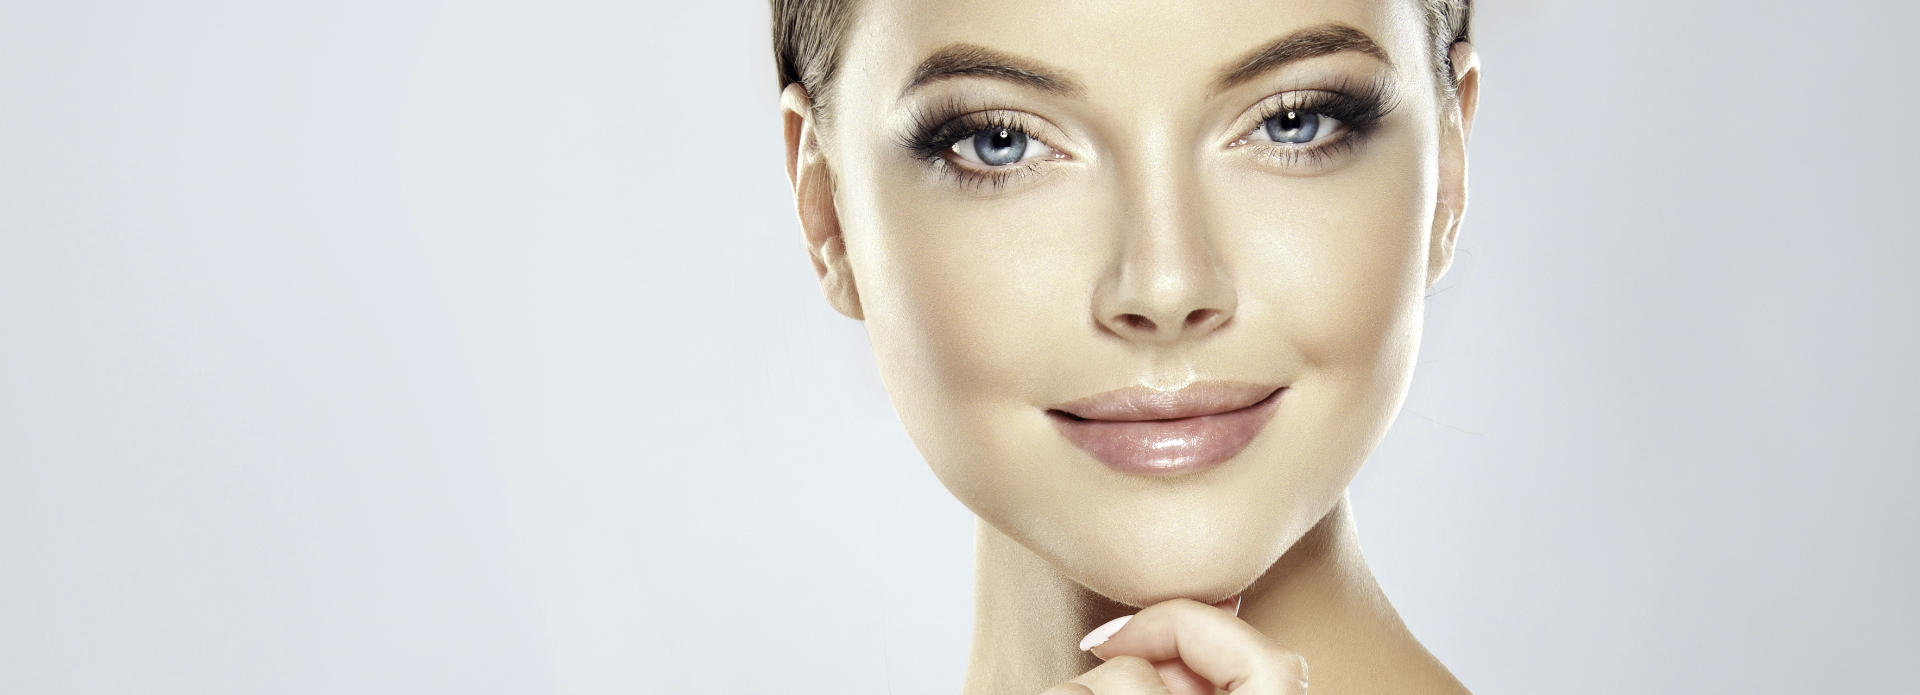 Face of a young-looking woman after cosmetic facial filler treatment.